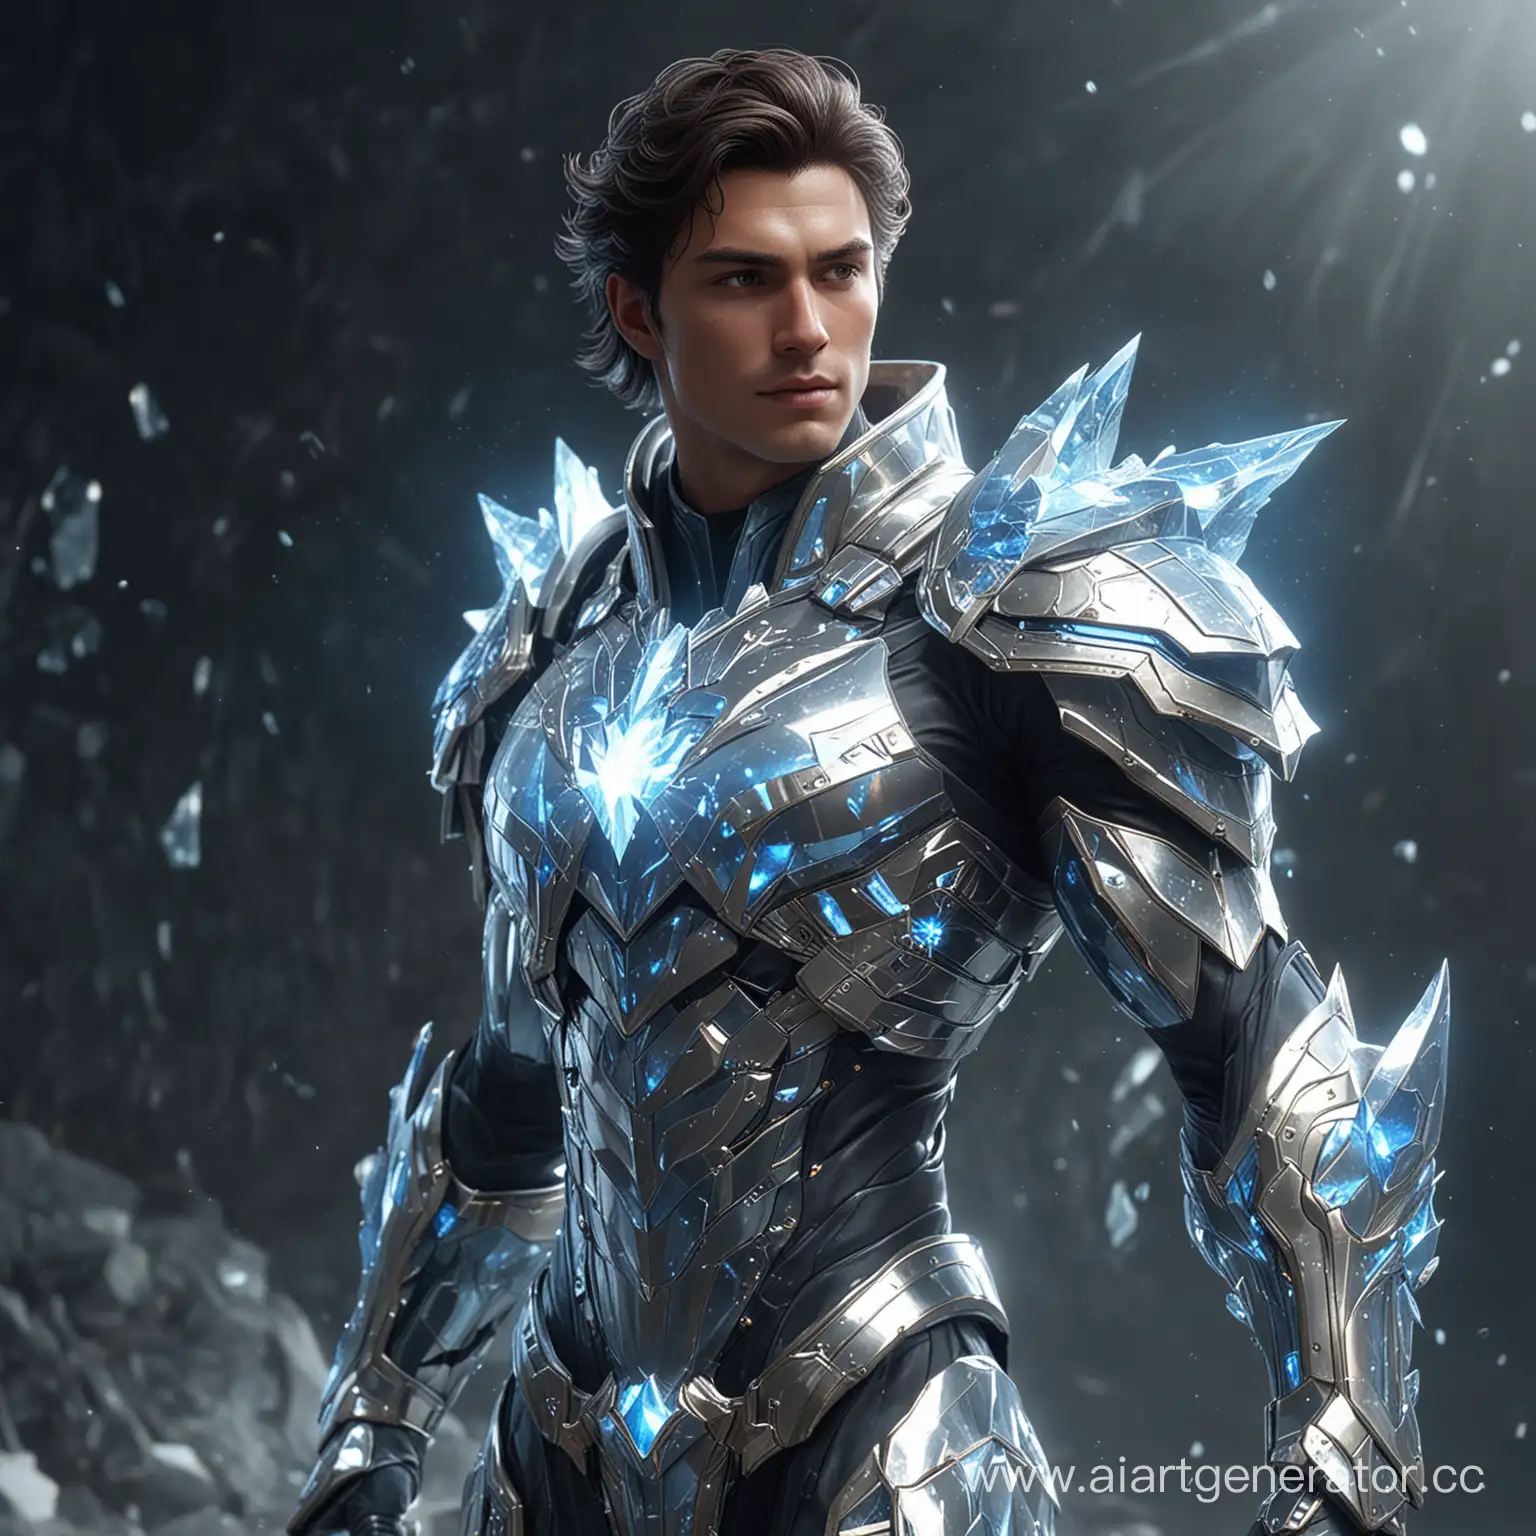 Crystal Guardian: A male her.Visualize a hero donning crystalline armor with reflective facets, emitting a soft glow, adorned with shimmering crystalline formations that refract light. Make it cinematic 